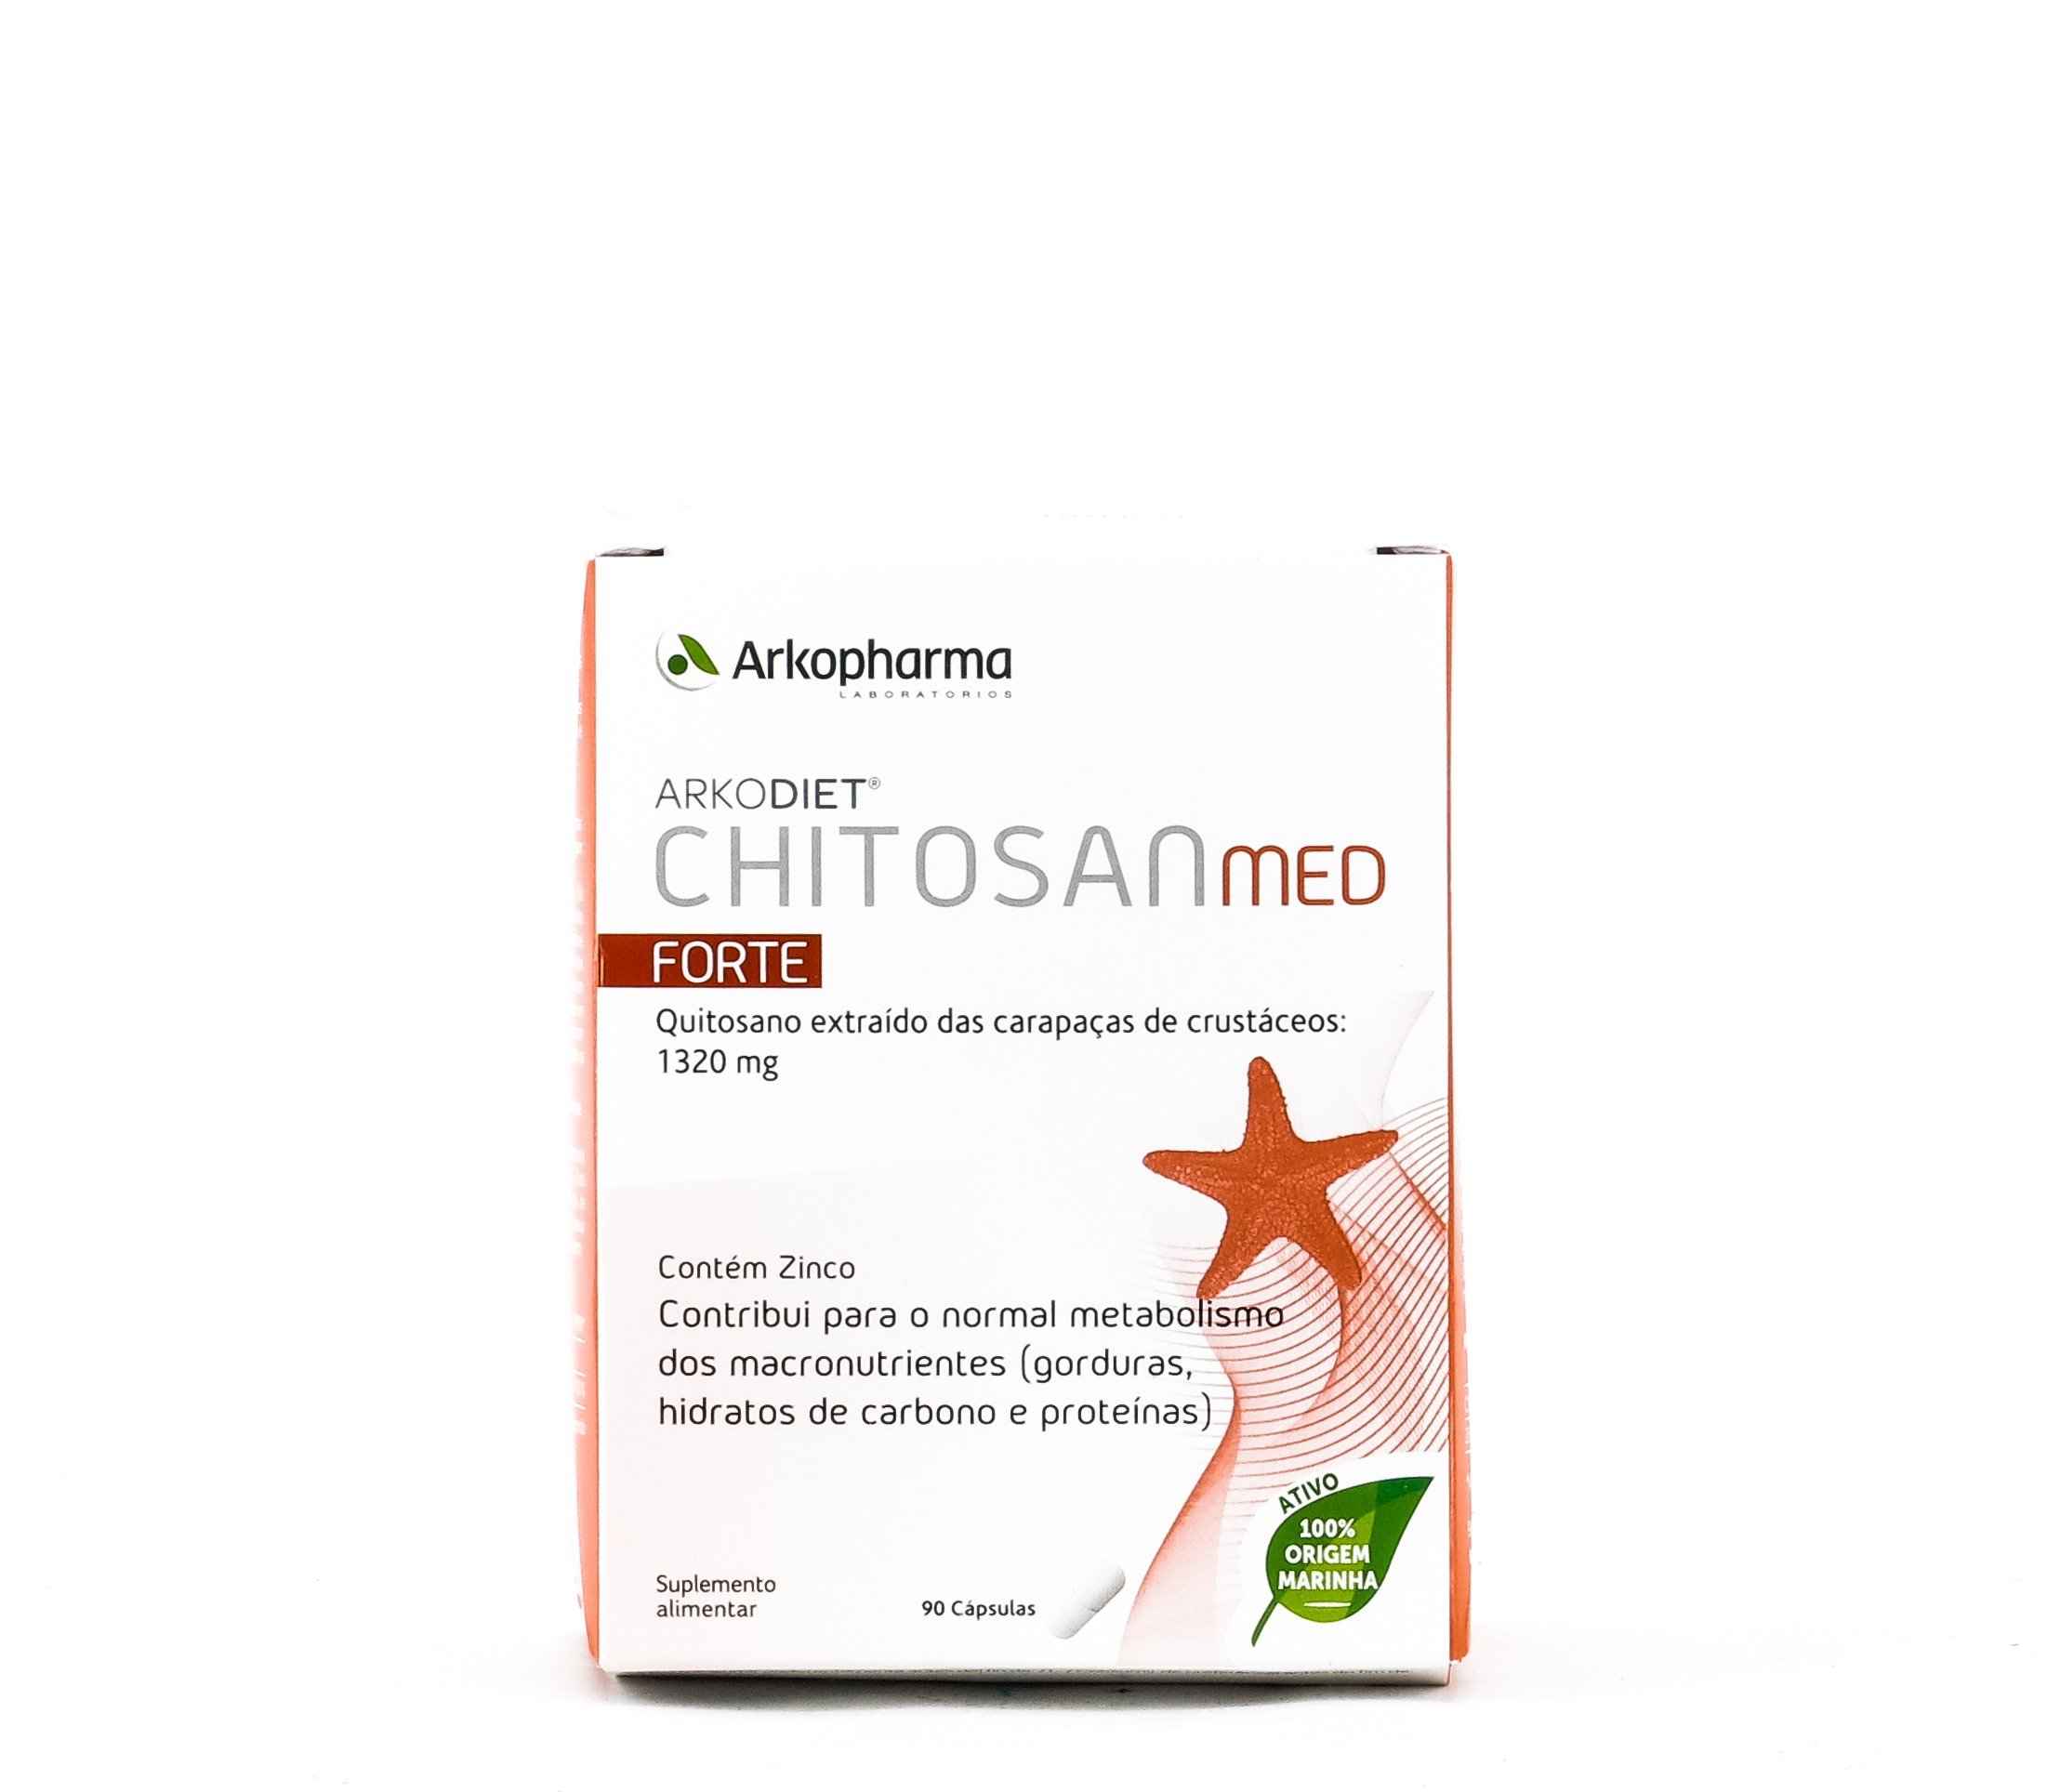 ARKODIET CHITOSAN EXTRA FORTE 325MG 90 CAPSULAS